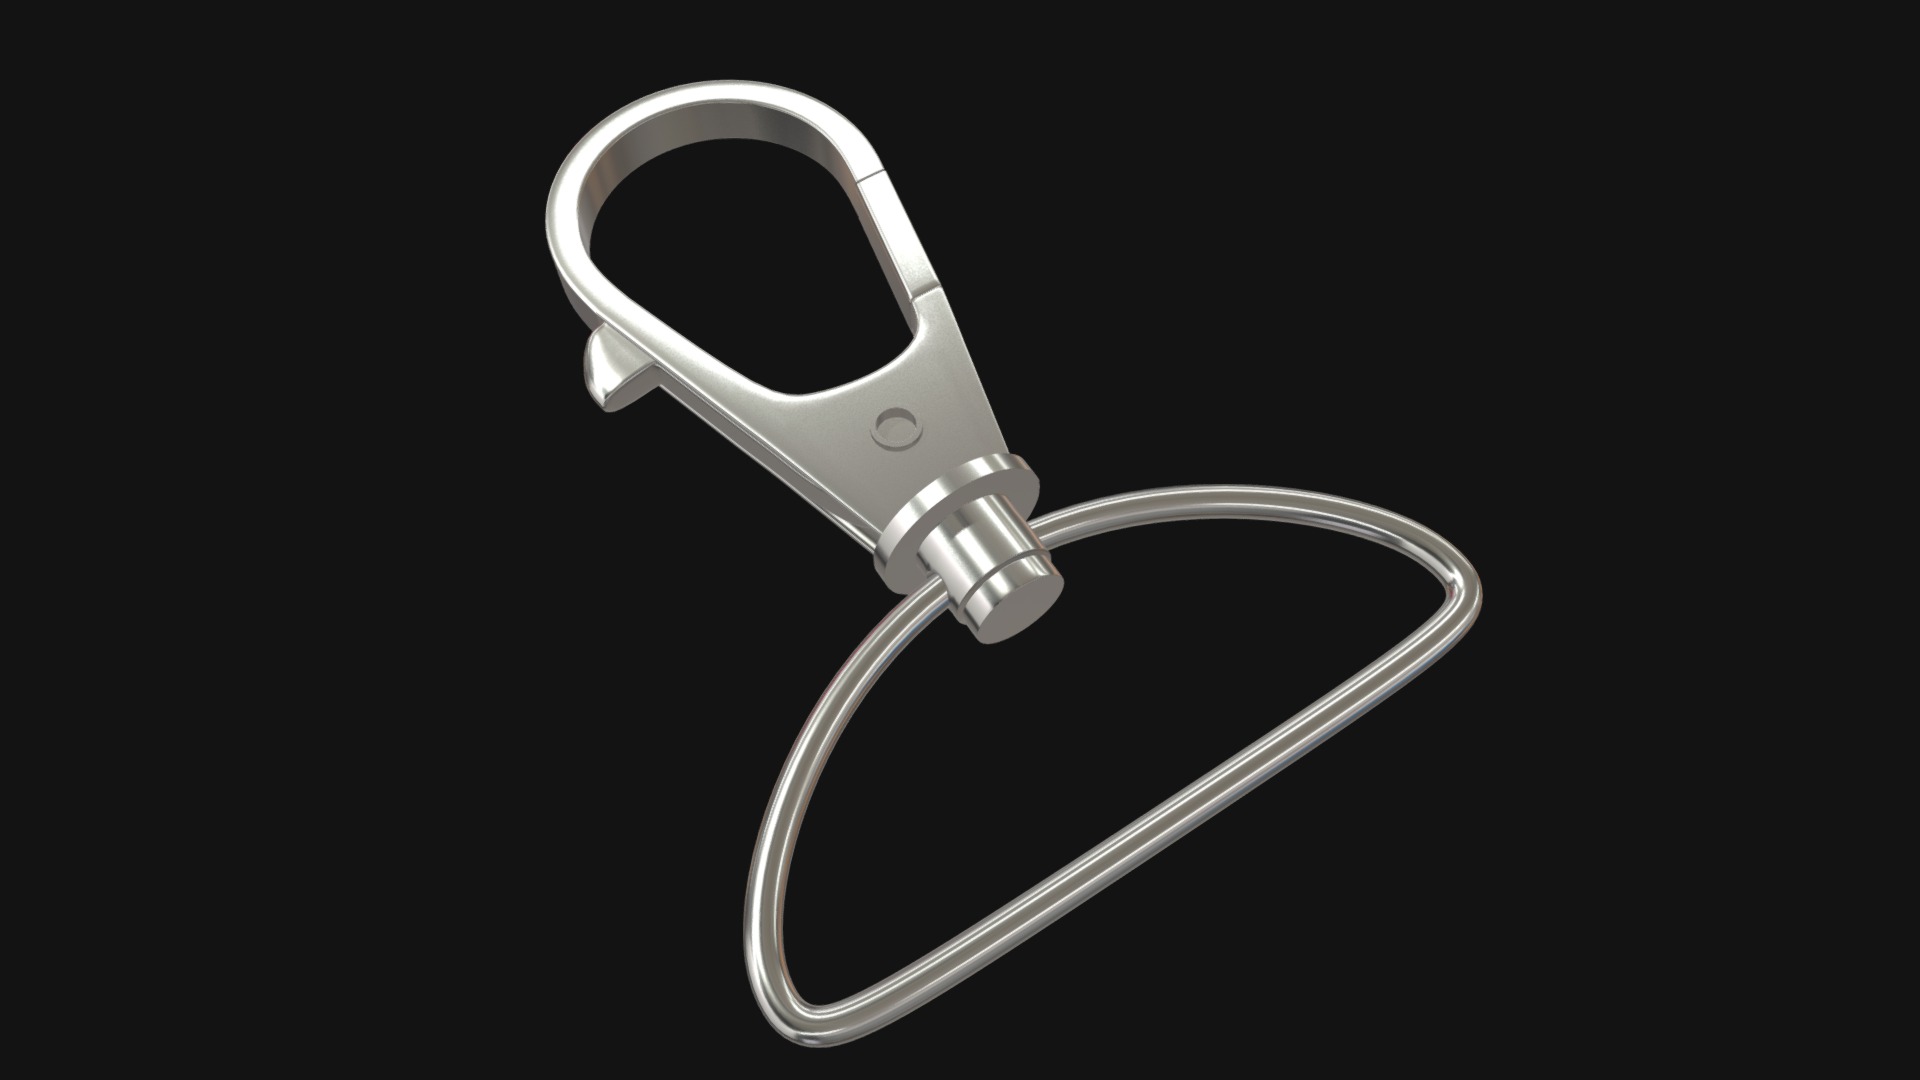 3D model Badge clip 2 - This is a 3D model of the Badge clip 2. The 3D model is about a silver and black headphone.